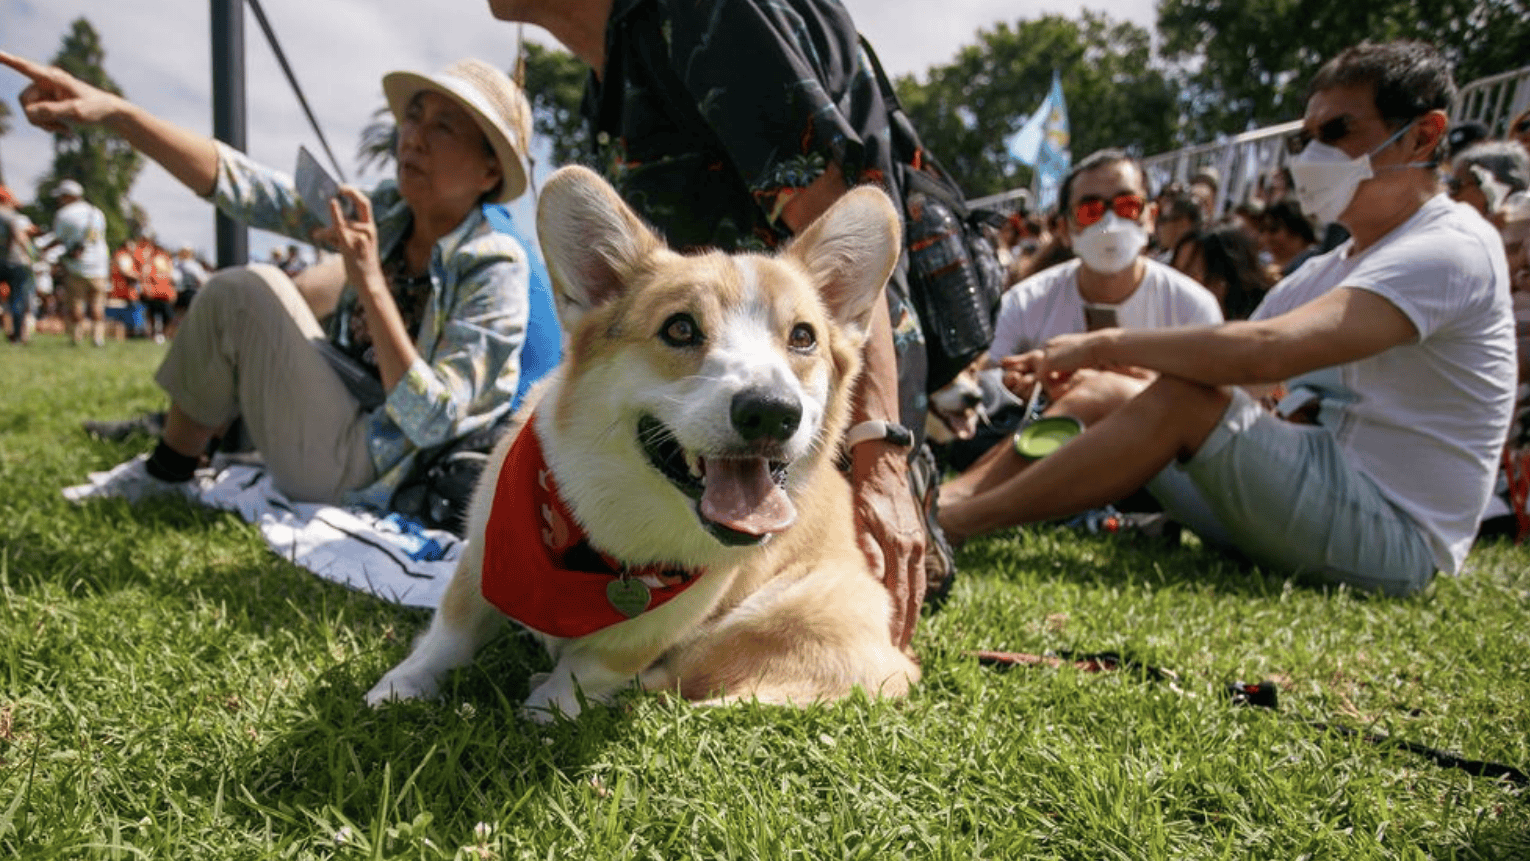 corgi on grass with people in background